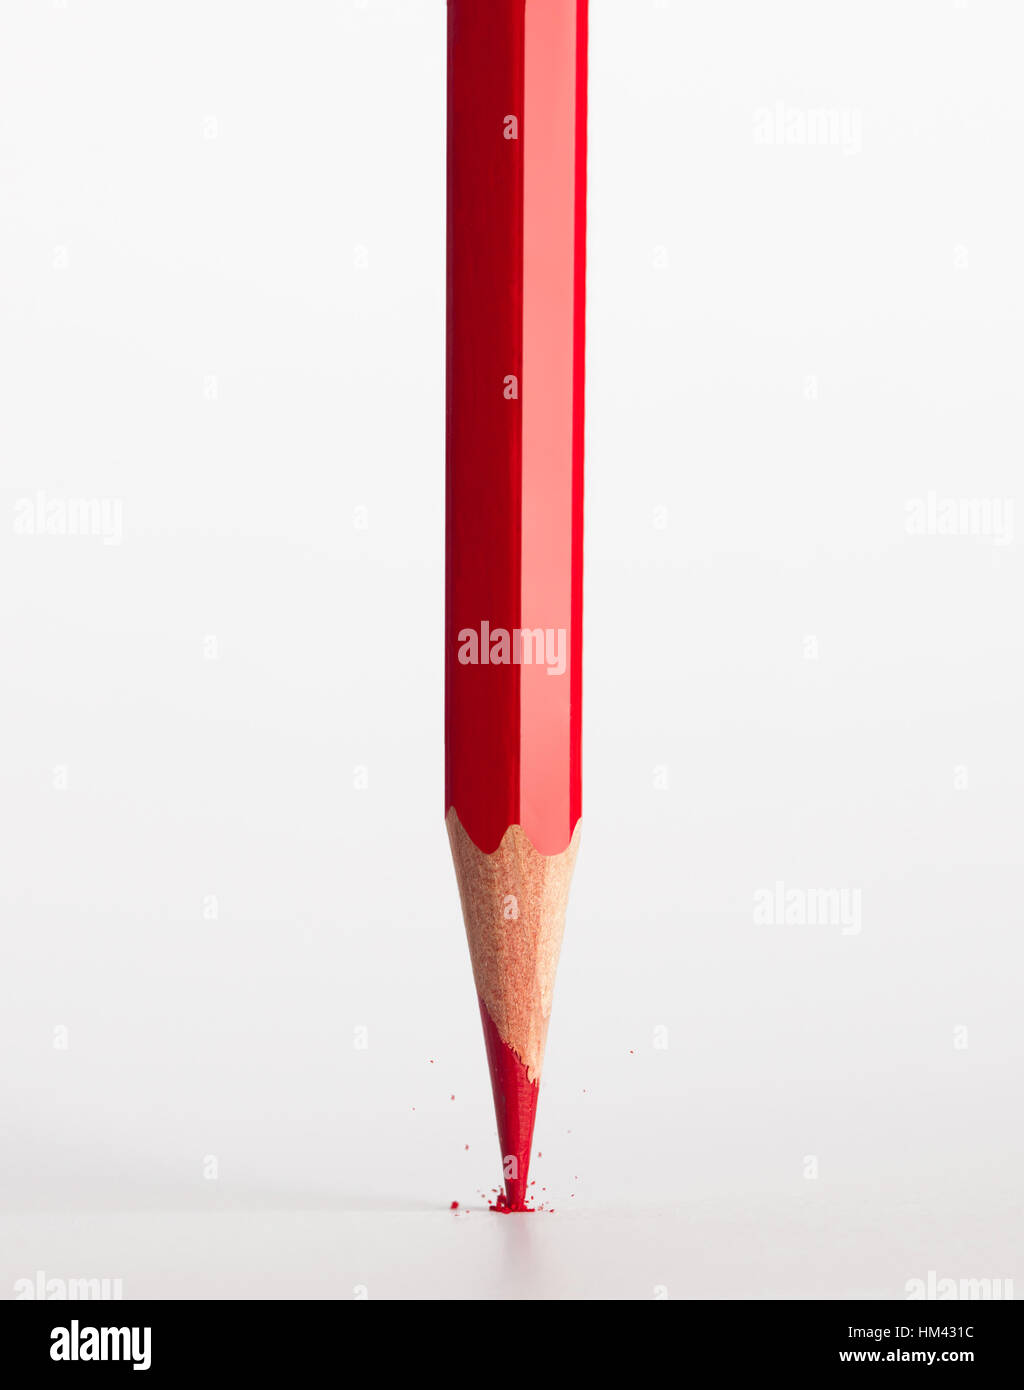 Broken tip of red pencil isolated on white background. Stock Photo